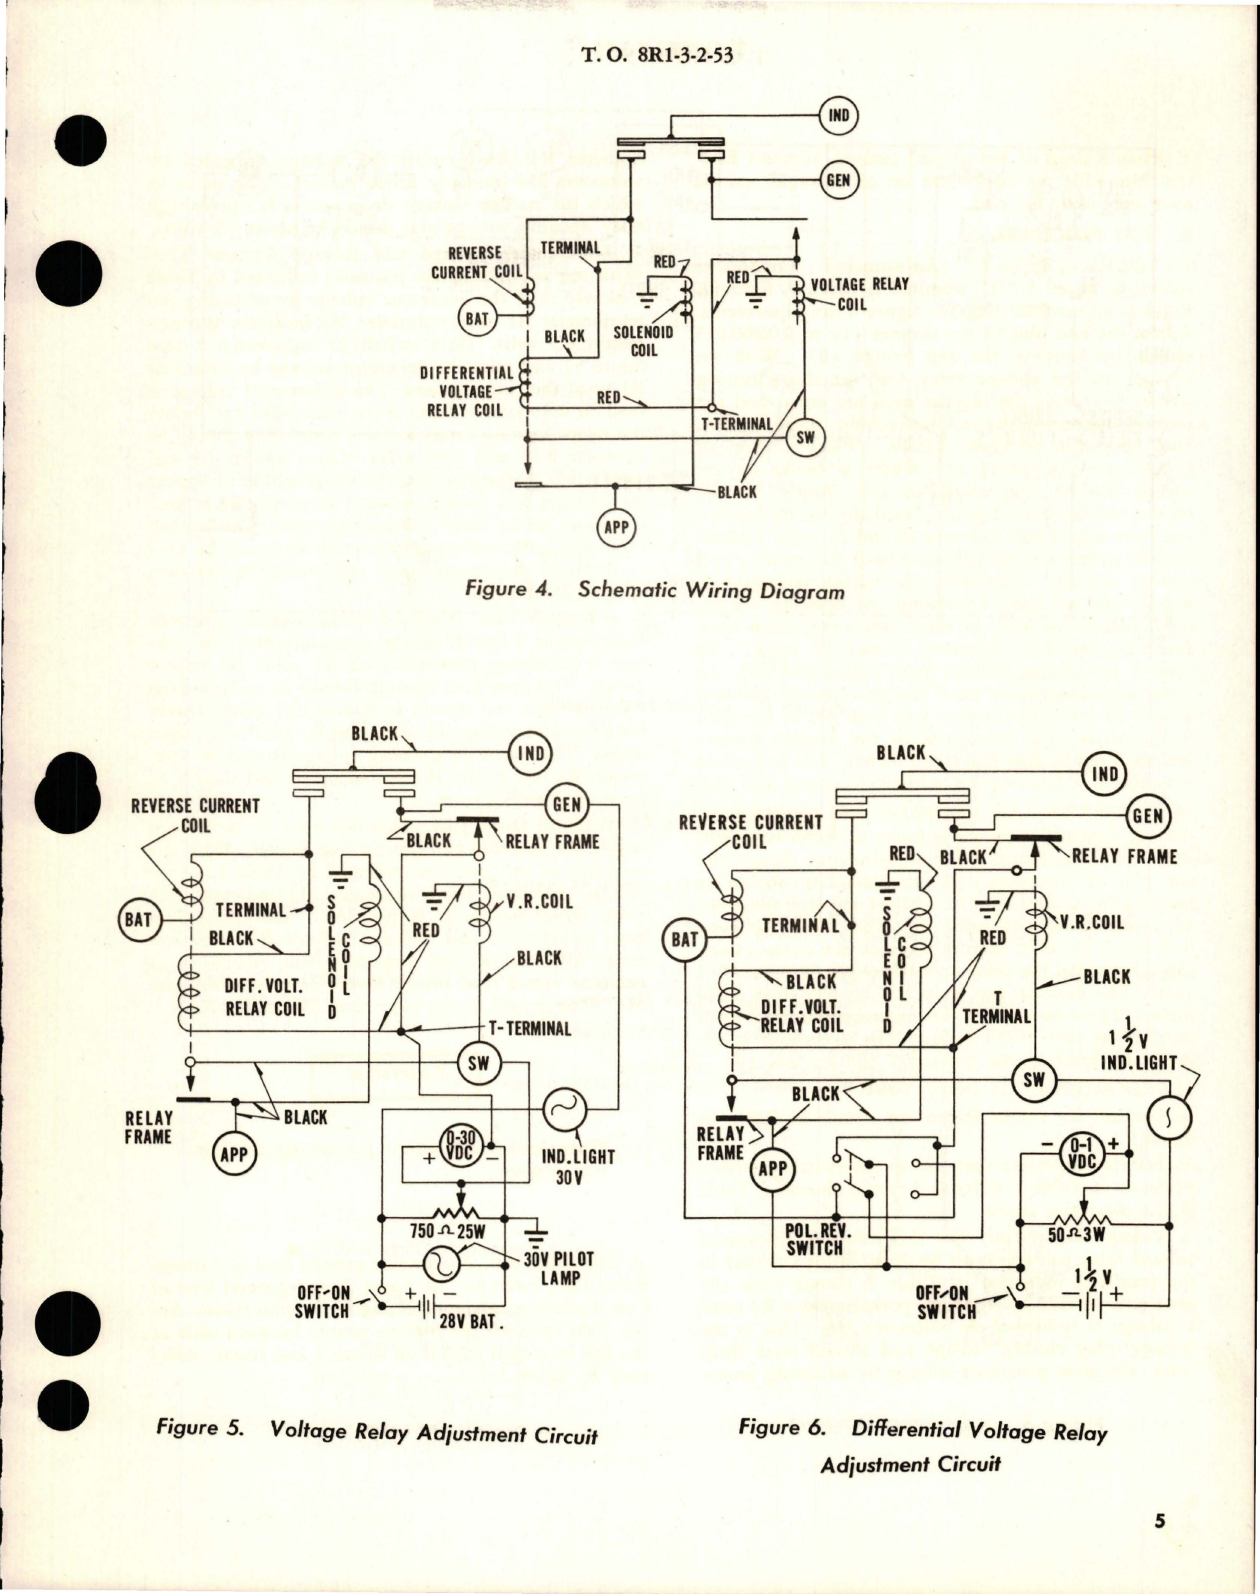 Sample page 5 from AirCorps Library document: Overhaul Instructions with Parts Breakdown for Reverse Current Cutout - Part 281-250A